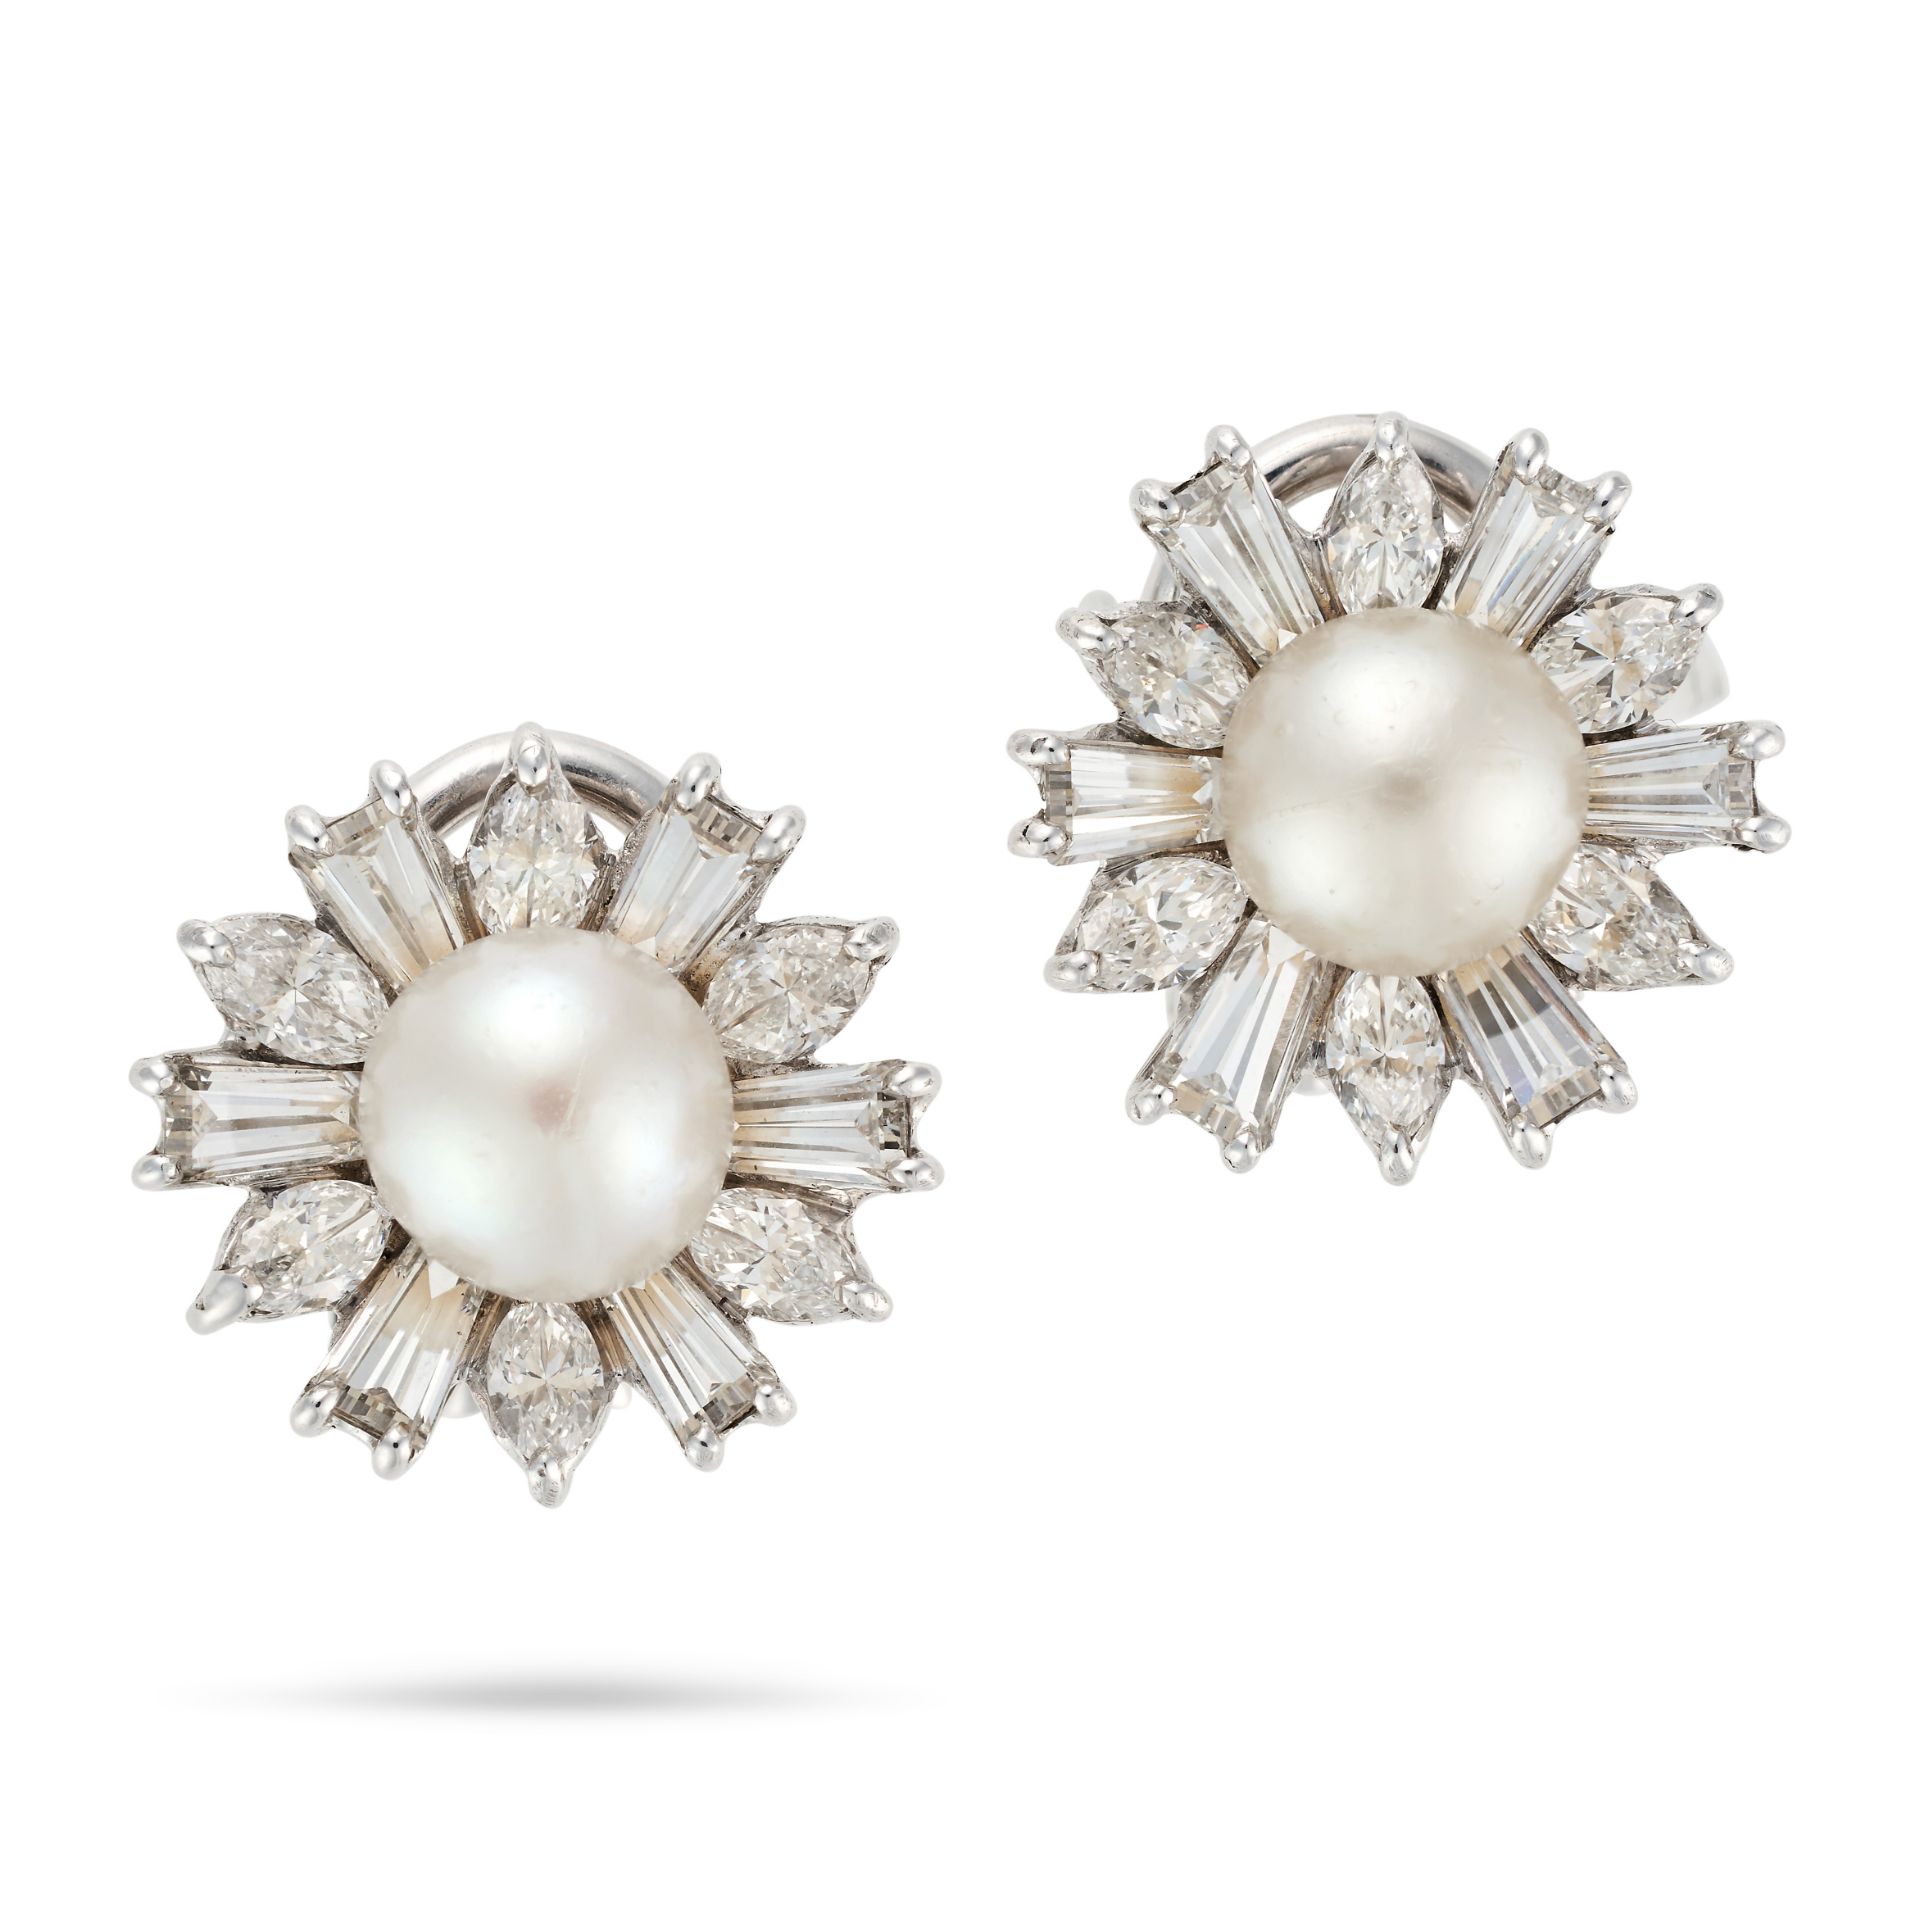 A PAIR OF NATURAL SALTWATER PEARL AND DIAMOND CLUSTER EARRINGS each set with a pearl of 7.1mm res...